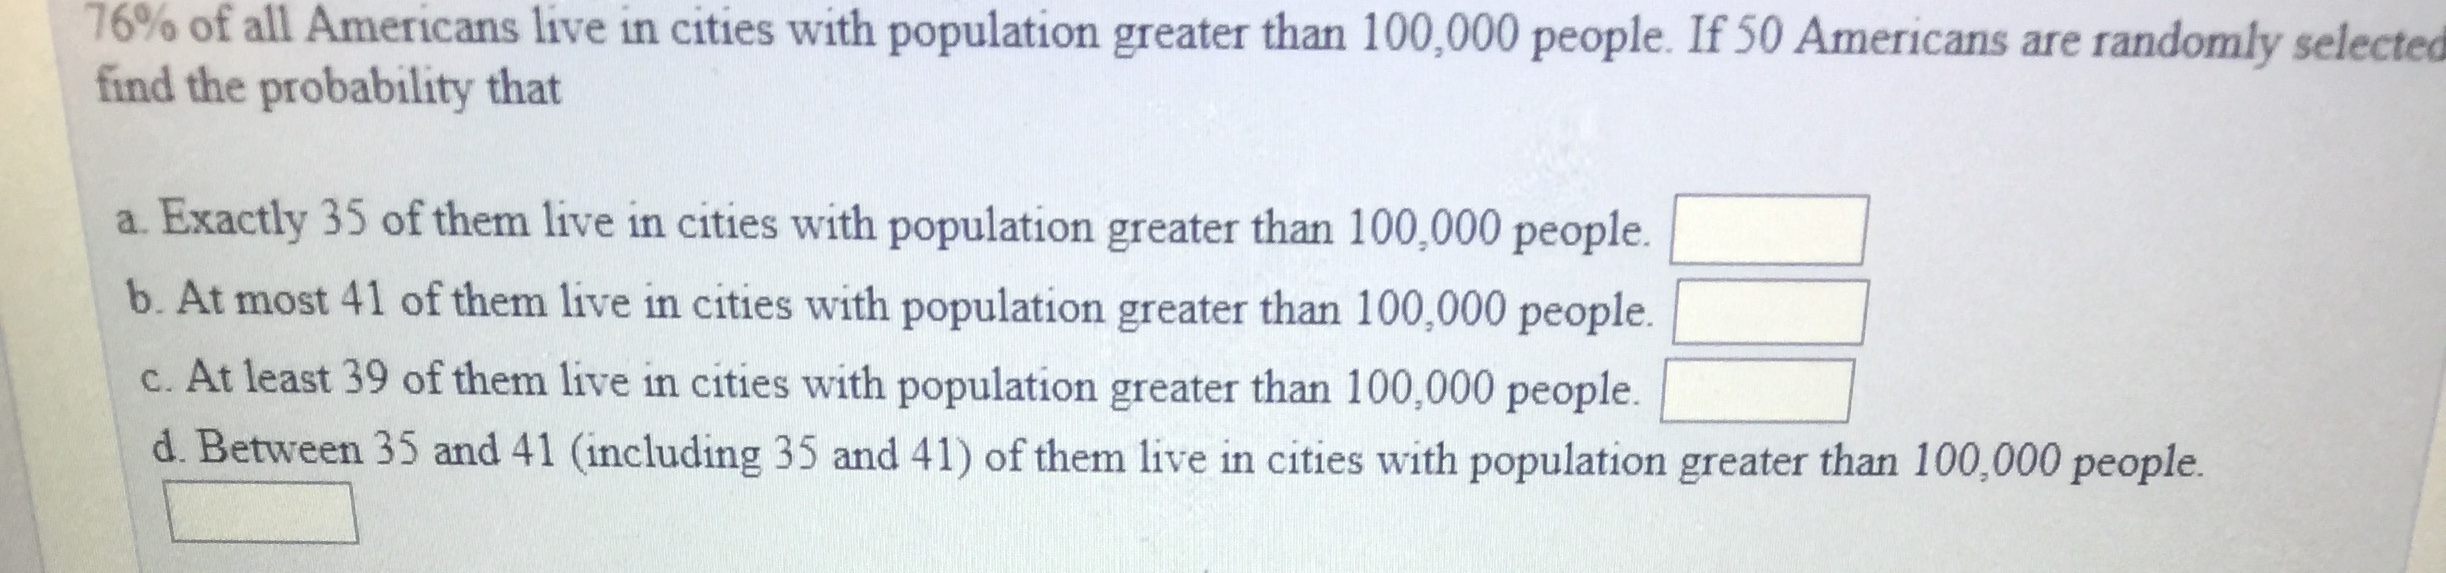 Answered 76 Of All Americans Live In Cities Bartleby